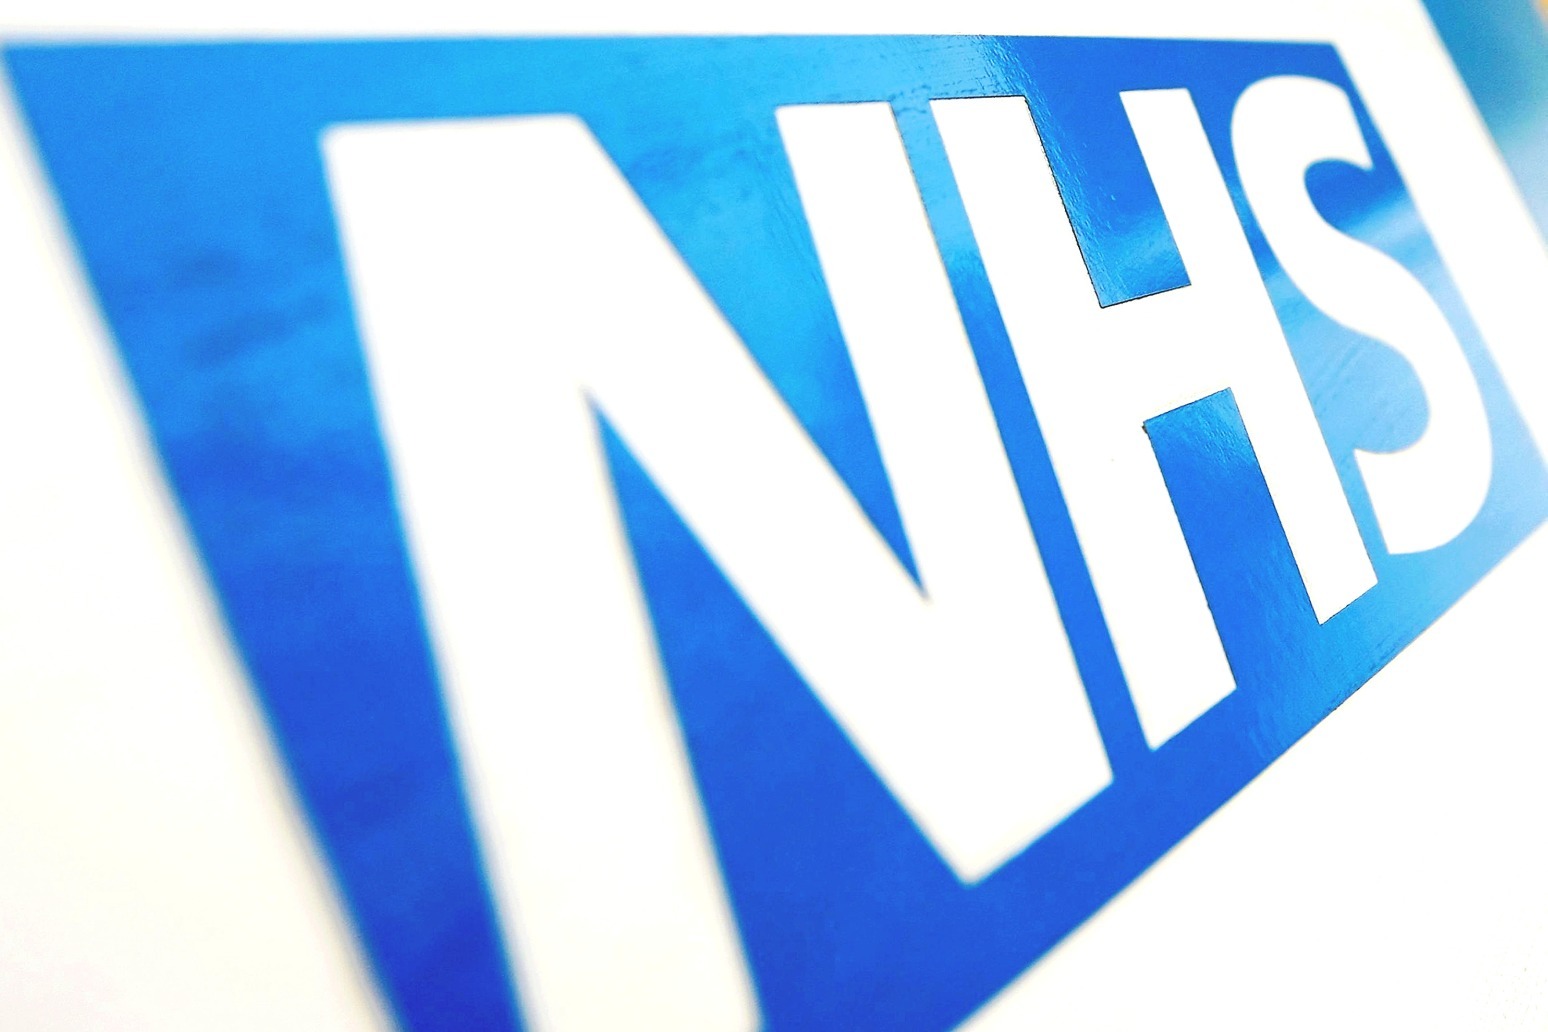 NHS facing ‘equivalent levels of pressure’ as the pandemic 